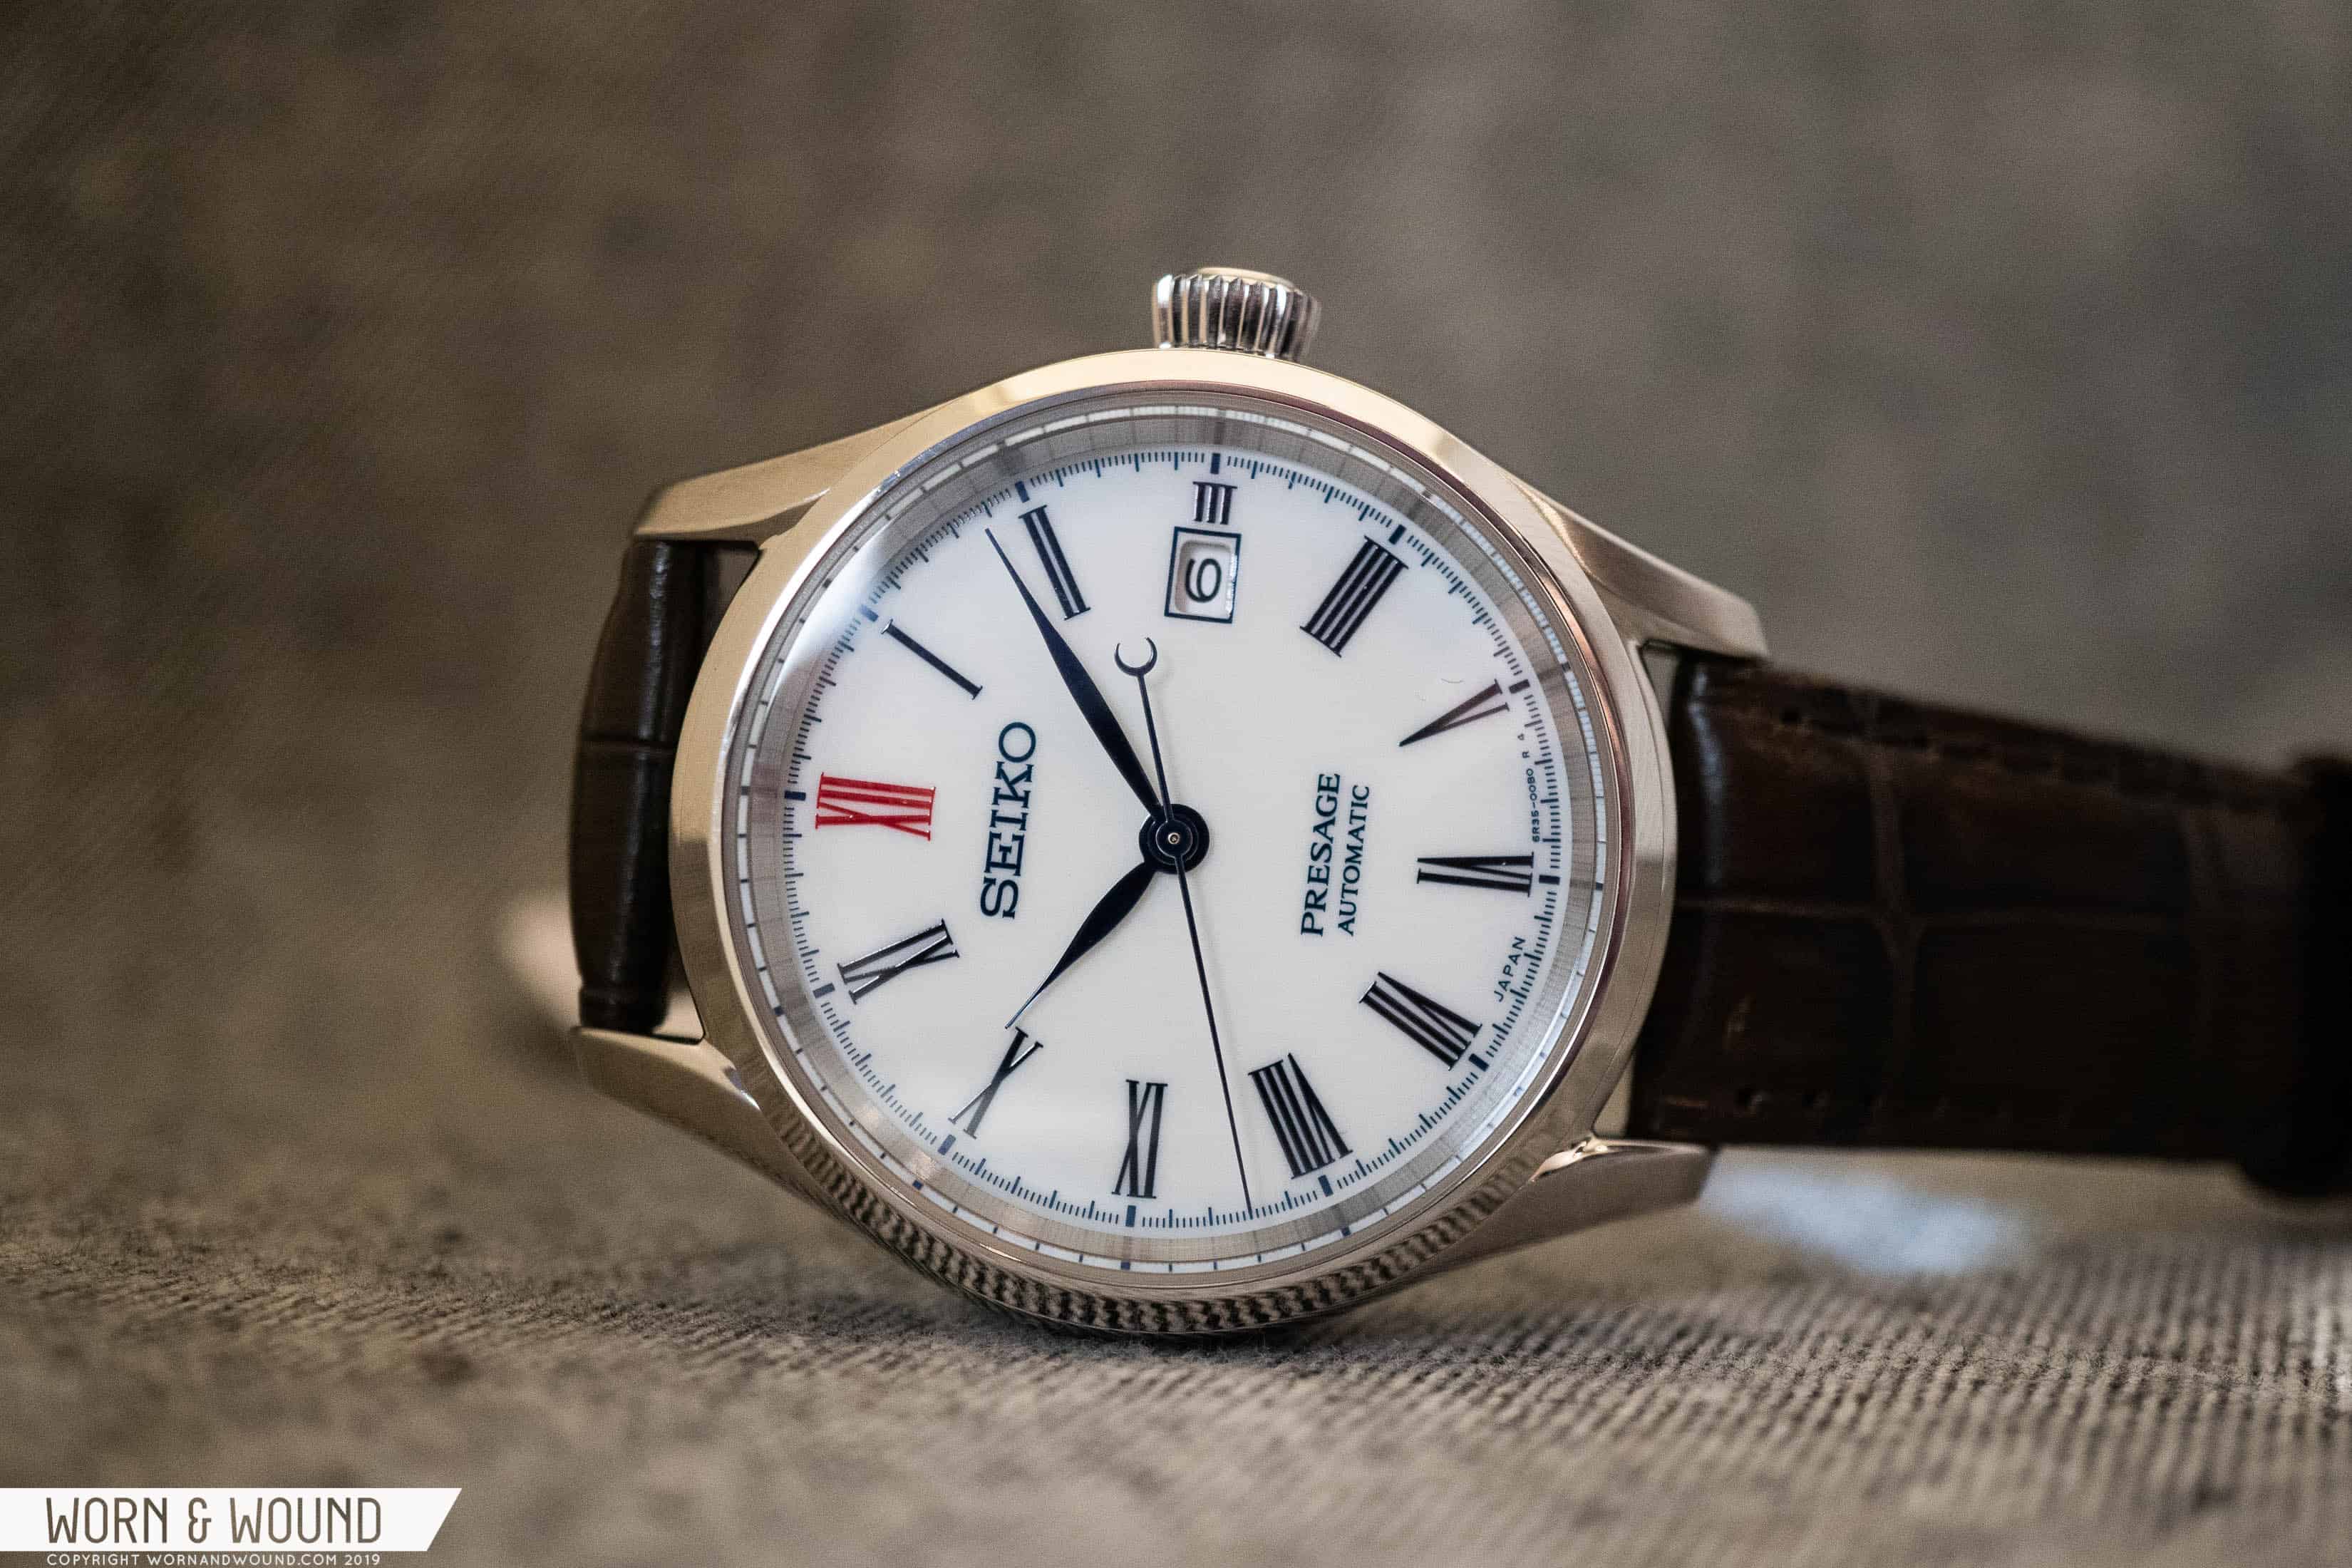 Baselworld 2019: First Look at the Seiko Presage Arita Porcelain Dial  Collection Refs. SPB093 and SPB095 - Worn & Wound